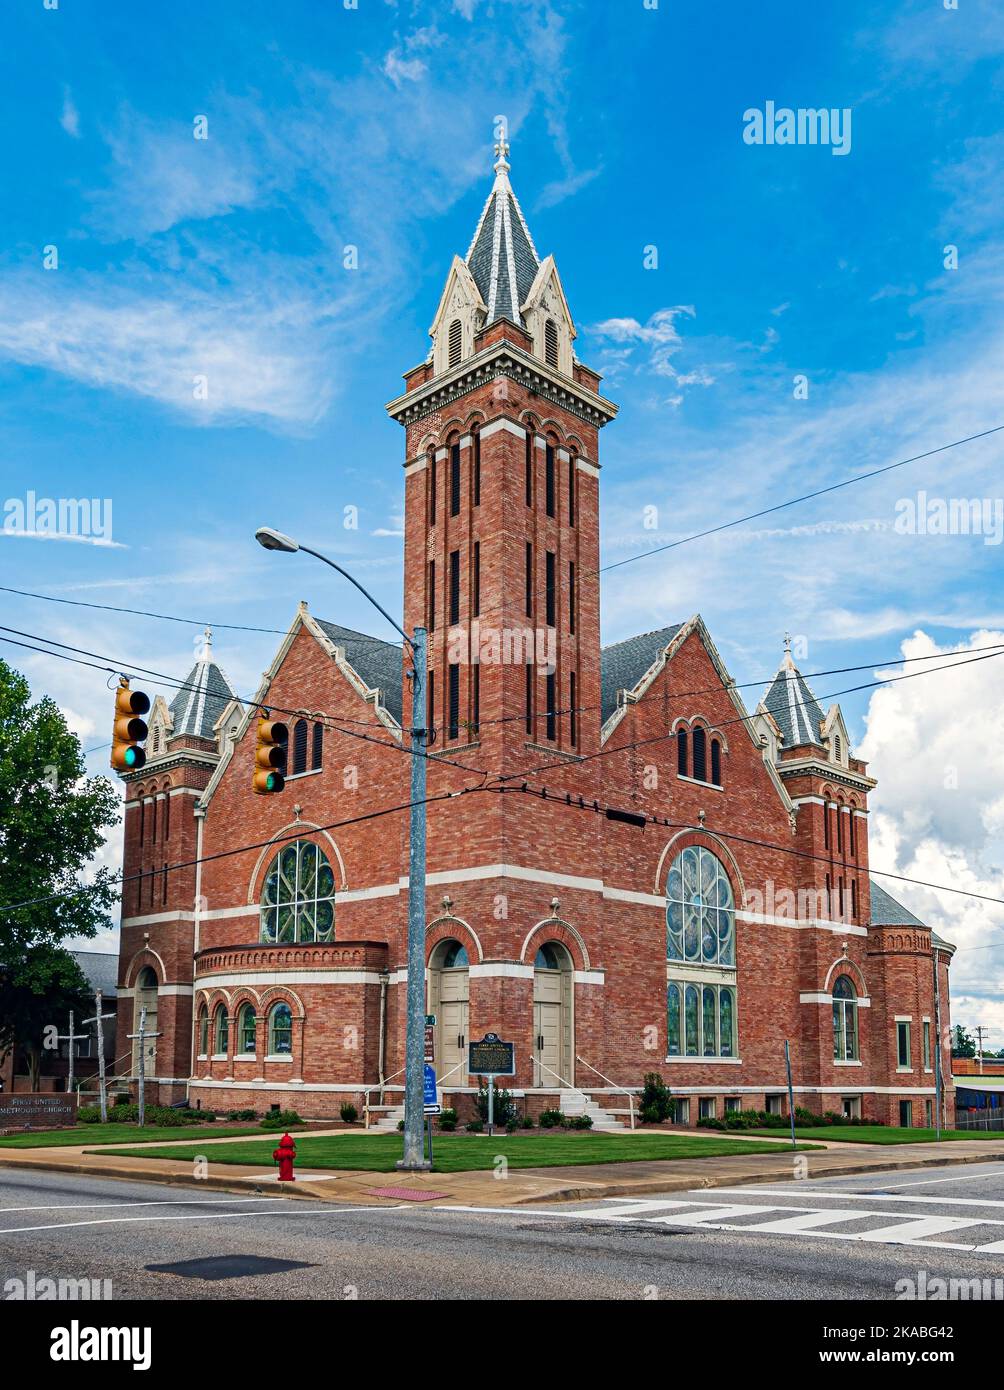 Troy, Alabama, USA - Sept. 3, 2022: Historic First United Methodist Church was organized in 1843. The current building was completed in 1904 in neo-Ro Stock Photo